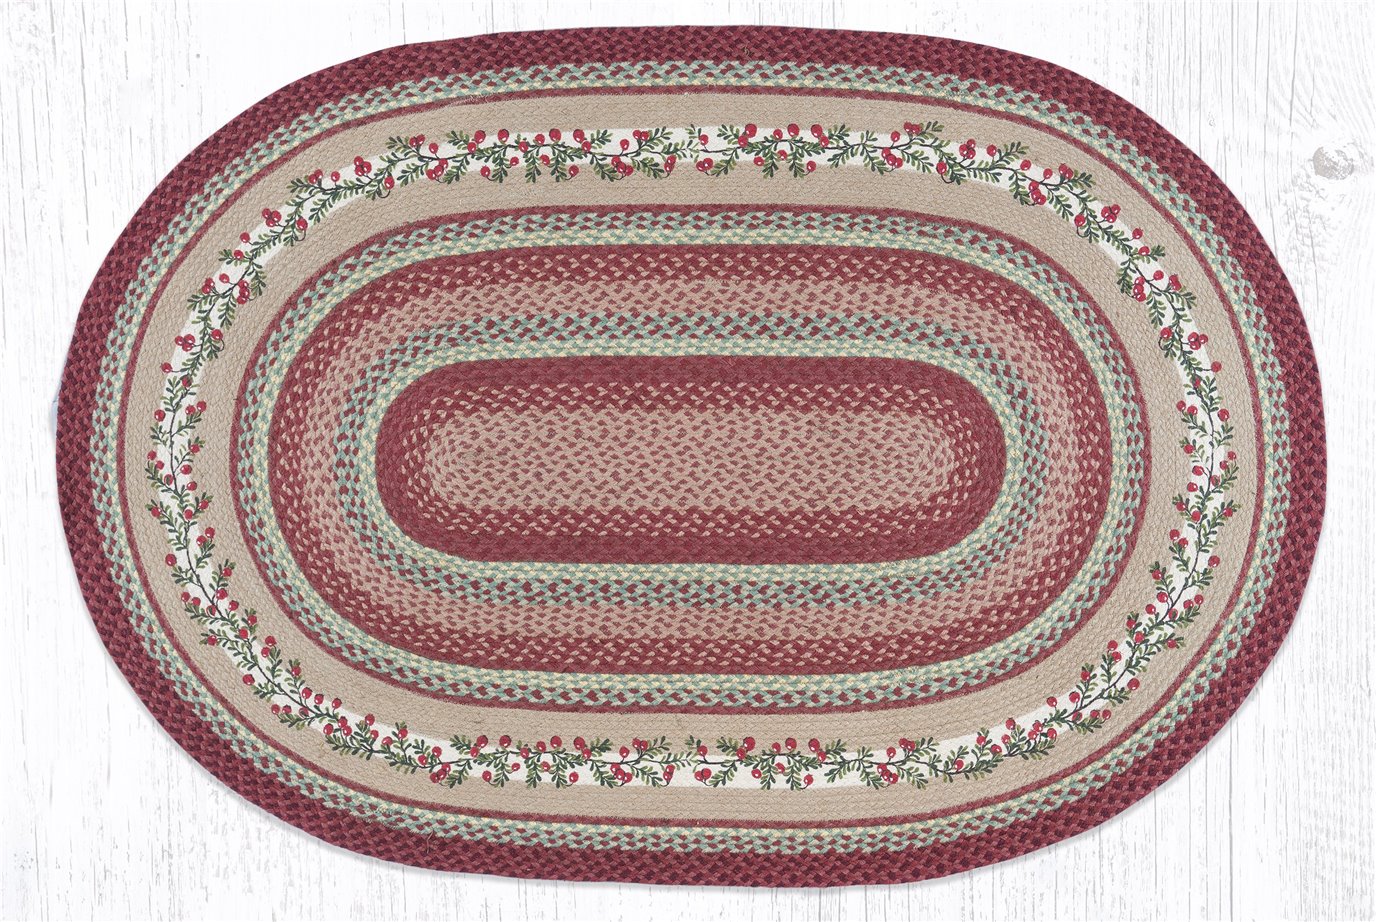 Cranberries Oval Braided Rug 4'x6'